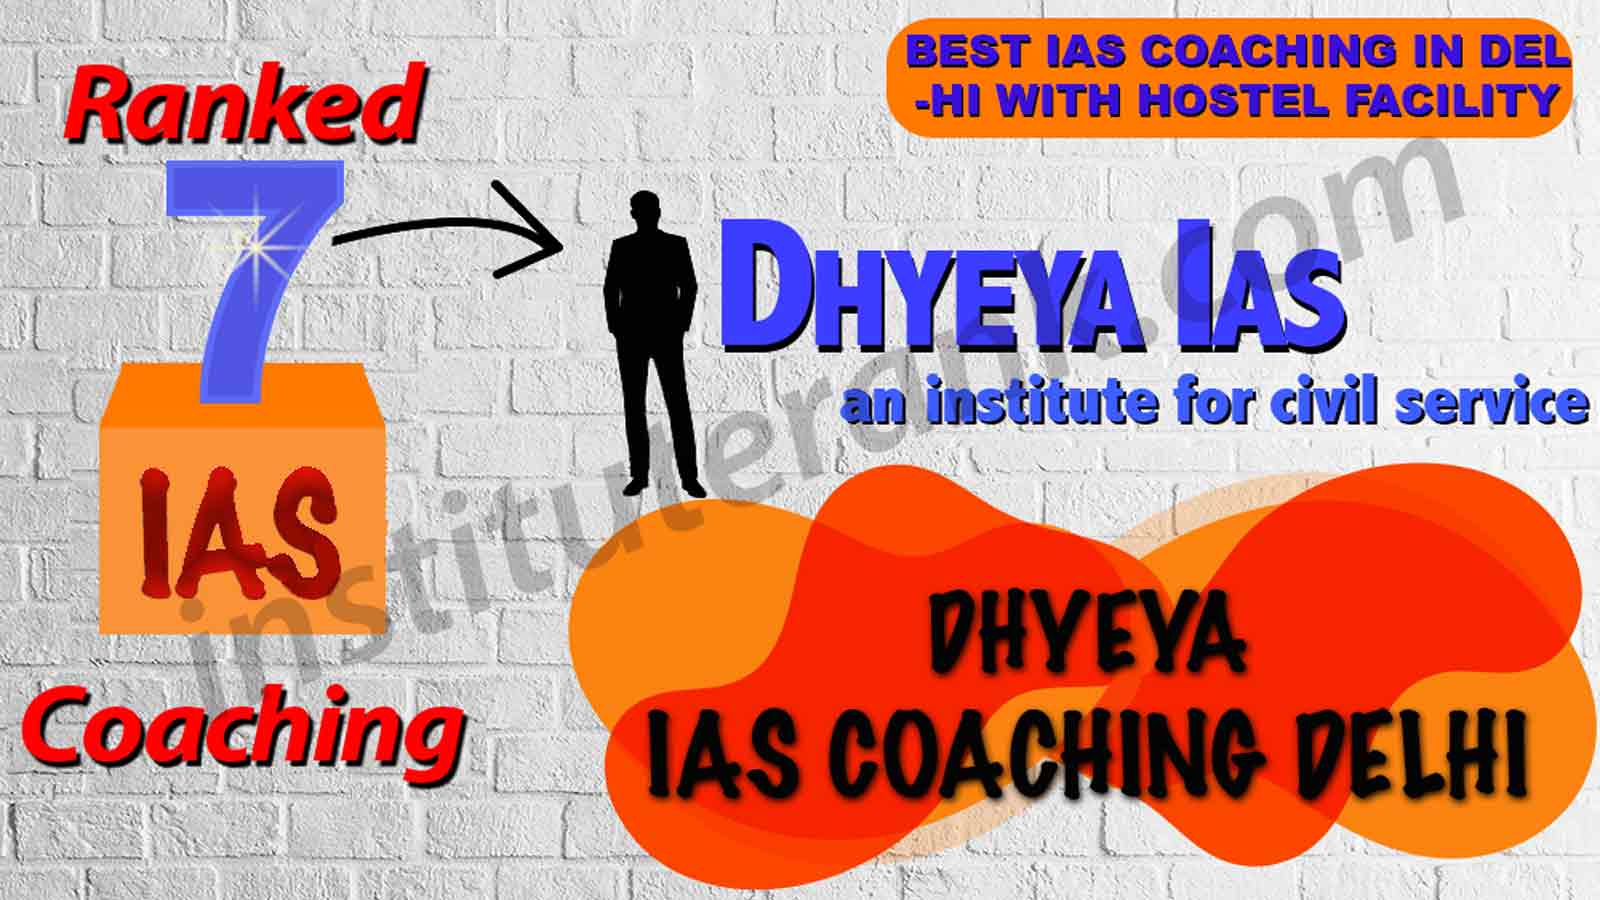 Best IAS Coaching in Delhi with Hostel Facility